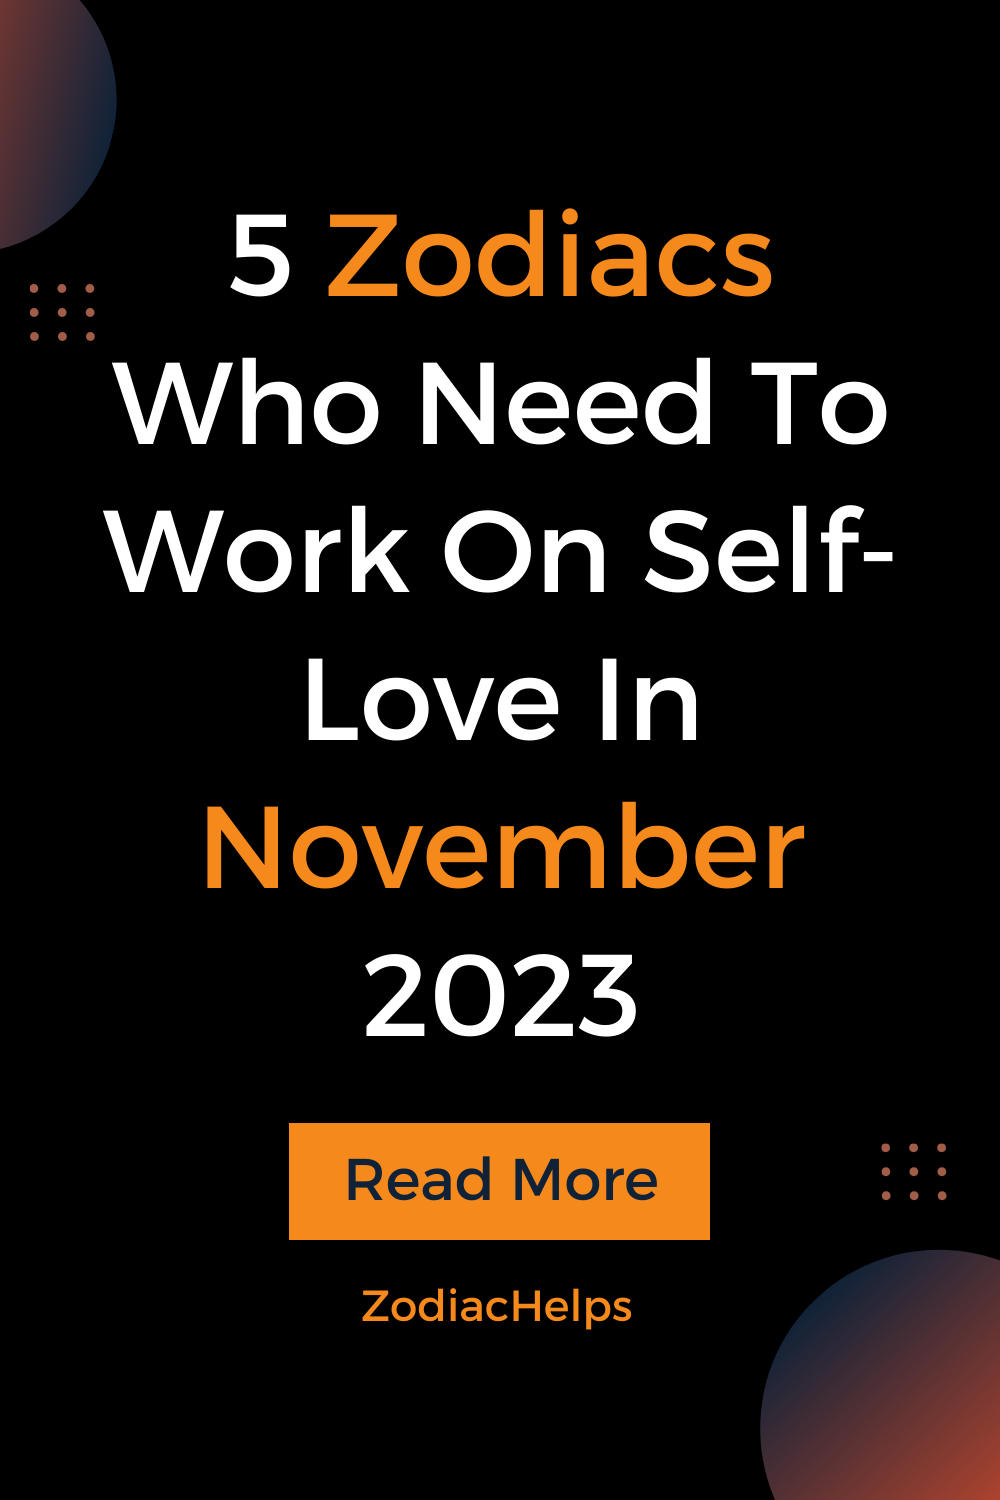 5 Zodiacs Who Need To Work On Self-Love In November 2023